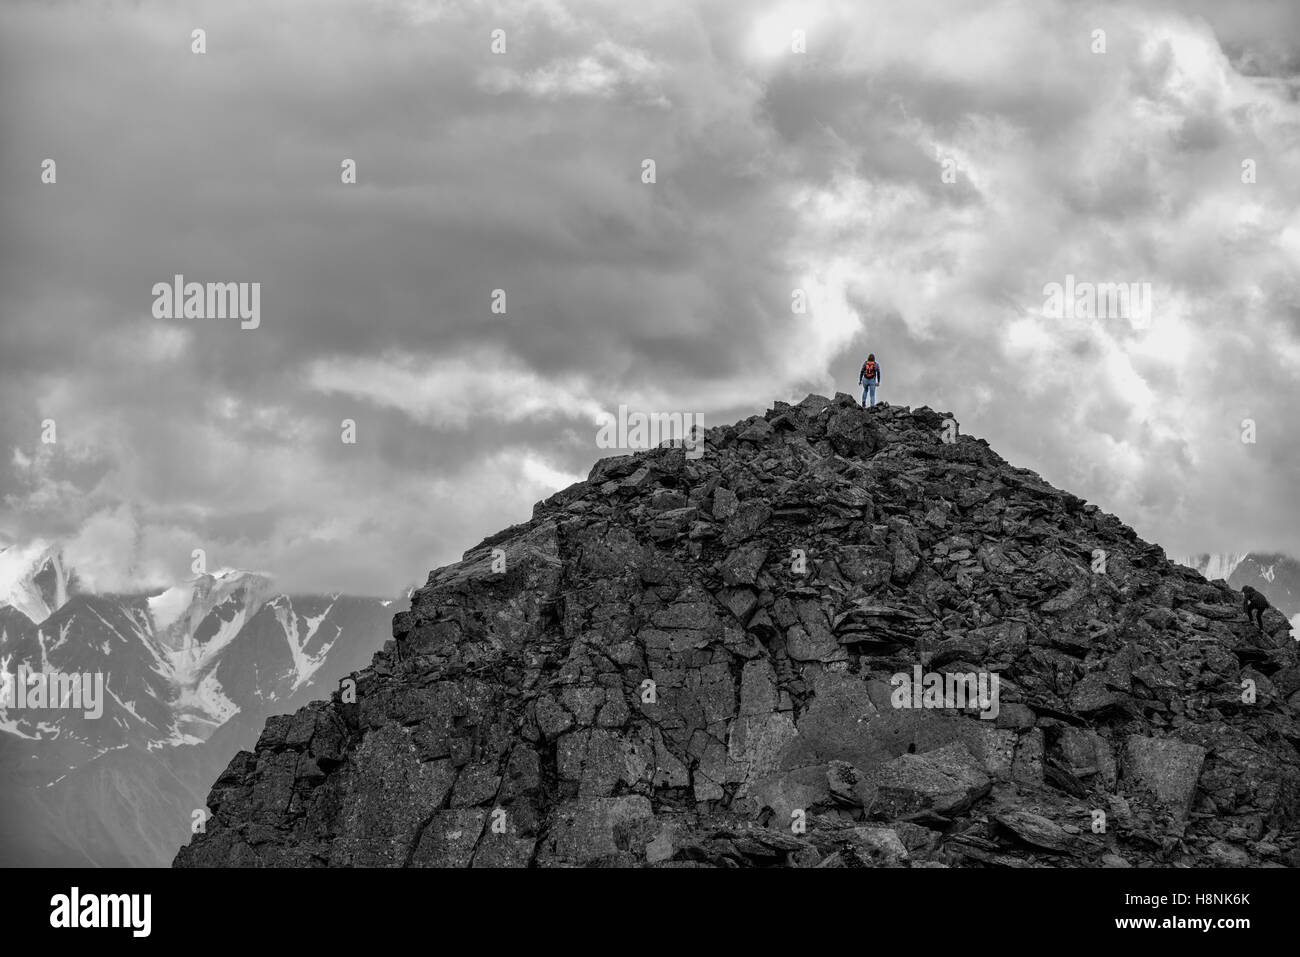 Silhouette of a girl with backpack on huge mountain. Very far. Epic black-and-white photo. Stock Photo